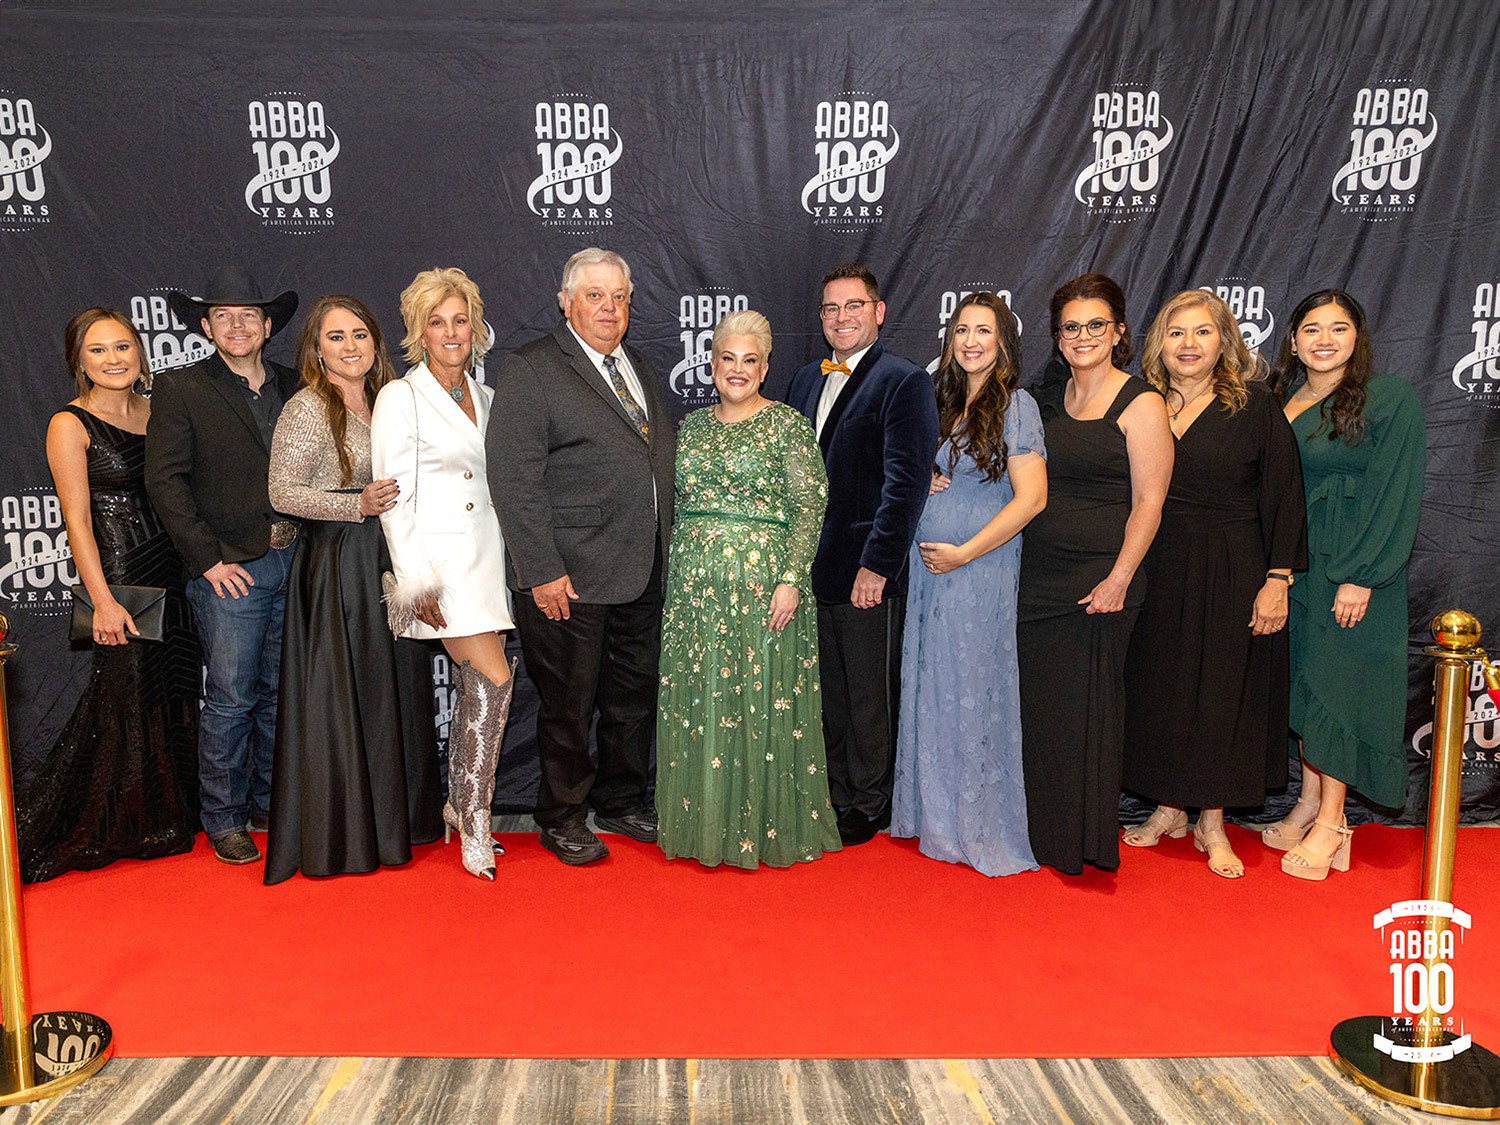 V8 Ranch Family on the Red Carpet at the ABBA 100th Anniversary Gala